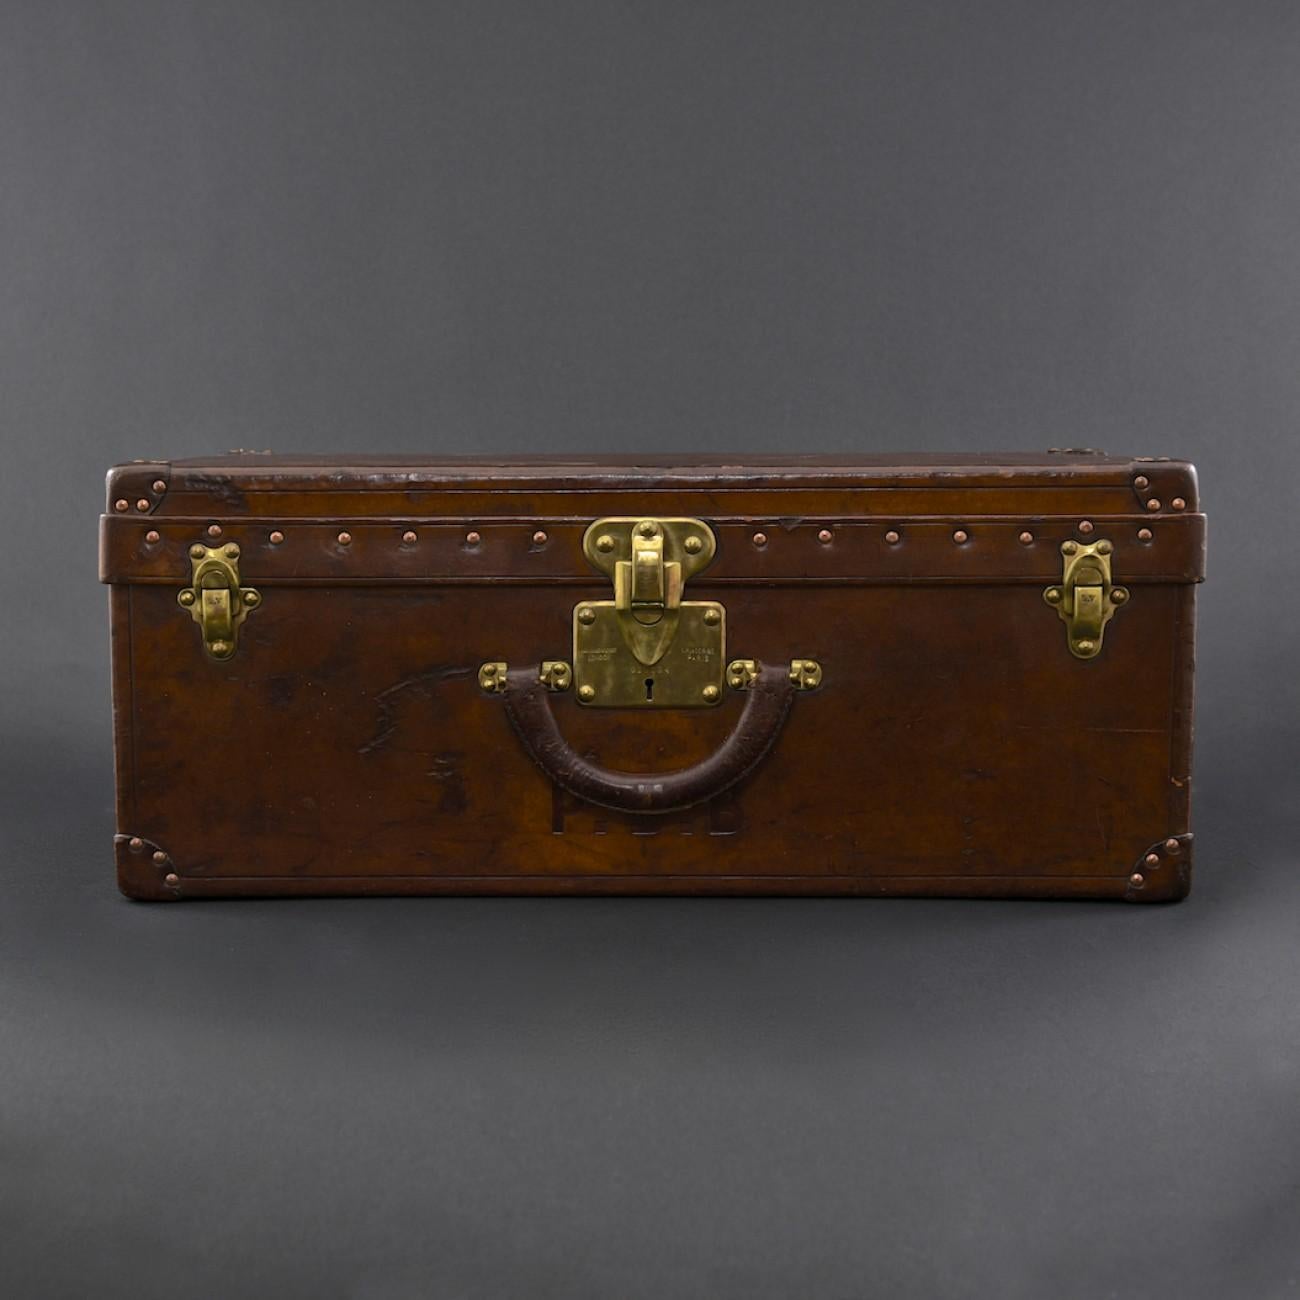 A rare leather Louis Vuitton case made specifically to carry shoes/boots. With brass fittings and felt lined interior; circa 1910. Originally there would have also been a felt lined tray.

Louis Vuitton was founded by its namesake in 1854, with the